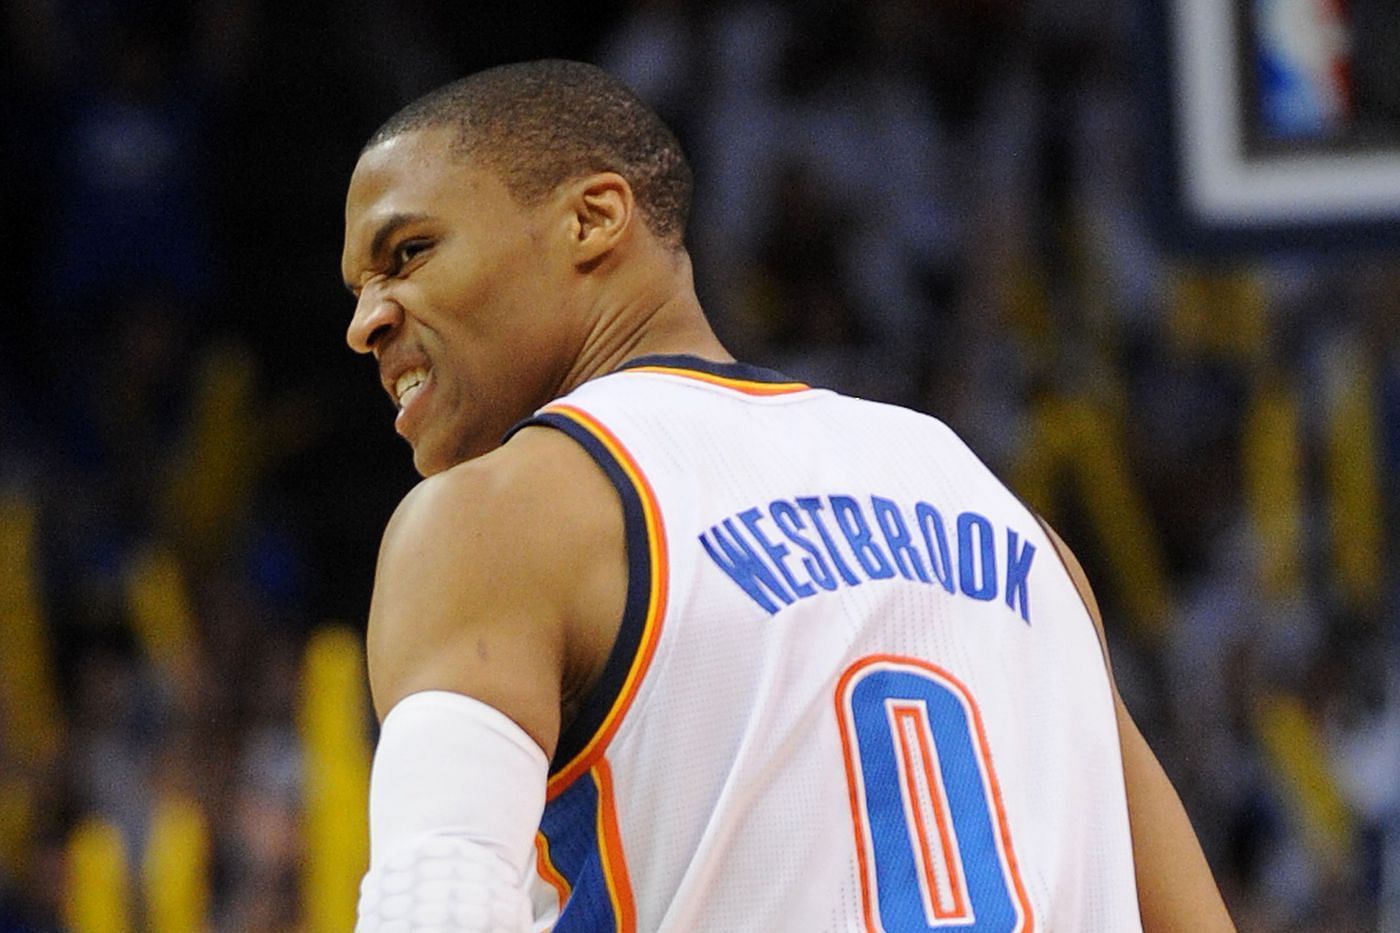 Russell Westbrook dealt with a setback during the upcoming season